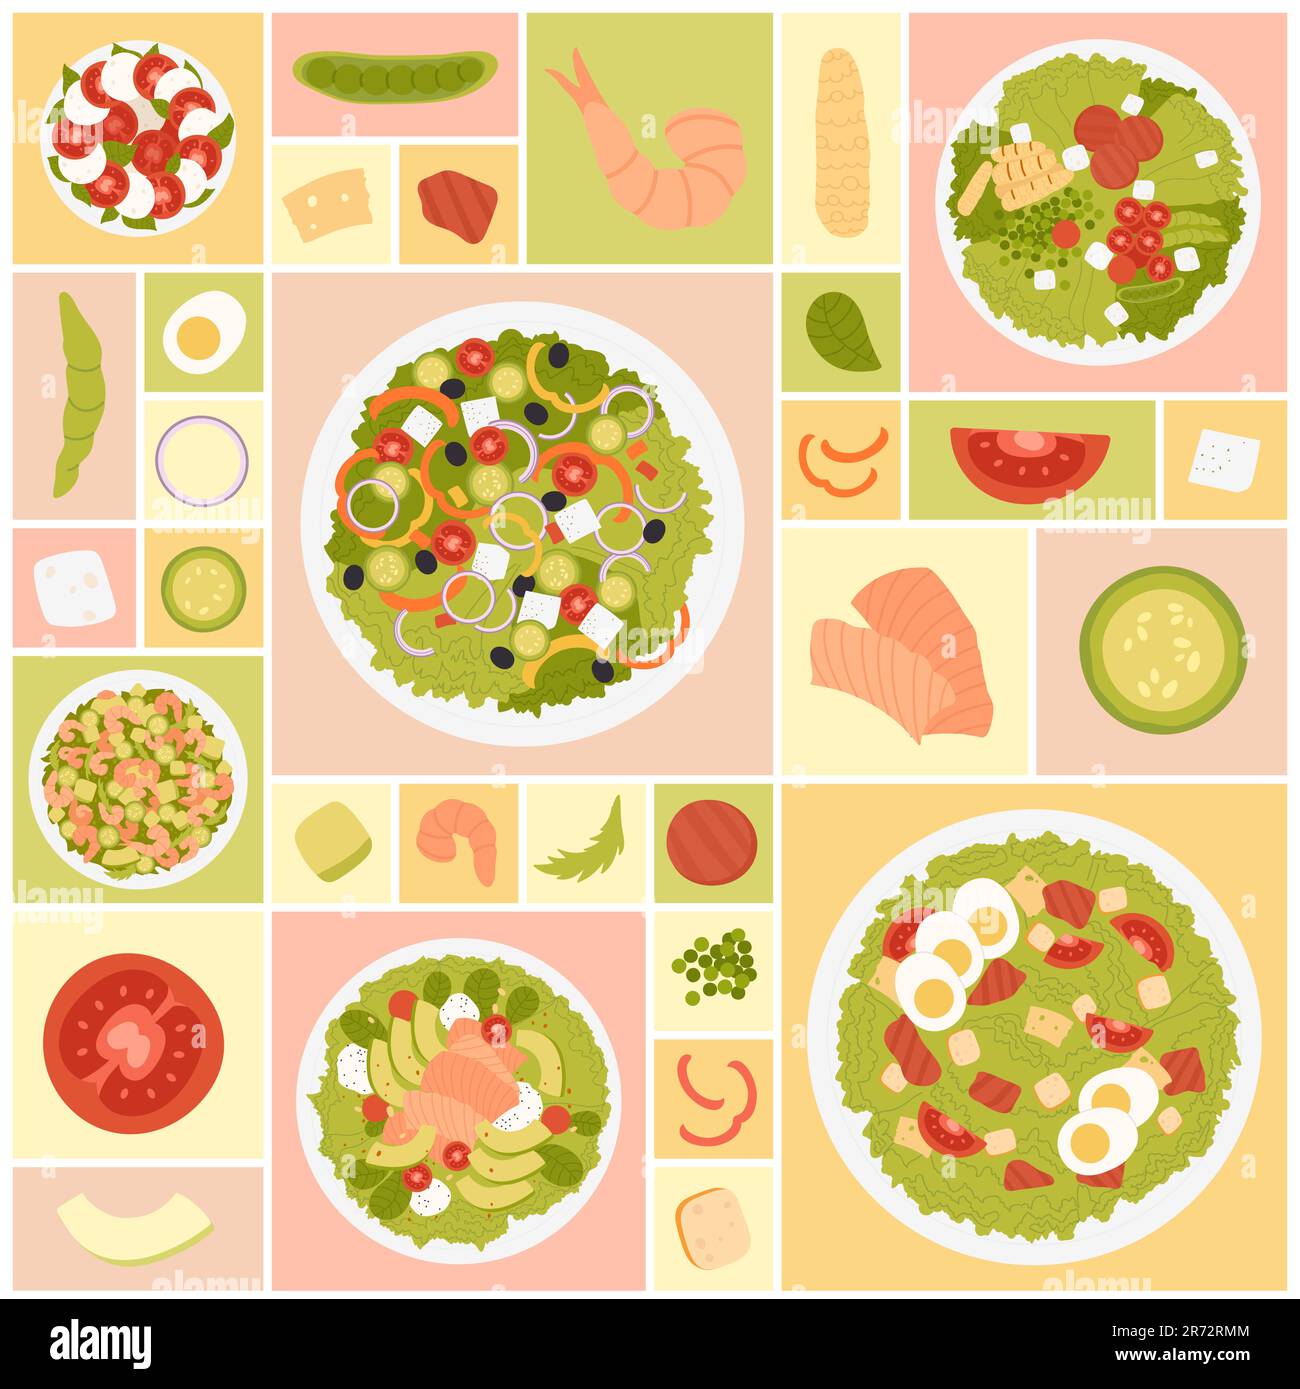 Salad set vector illustration. Cartoon isolated top view of healthy food, salad plates and ingredients, fresh vegetable and shrimp, salmon and avocado slice in trendy geometric design background Stock Vector